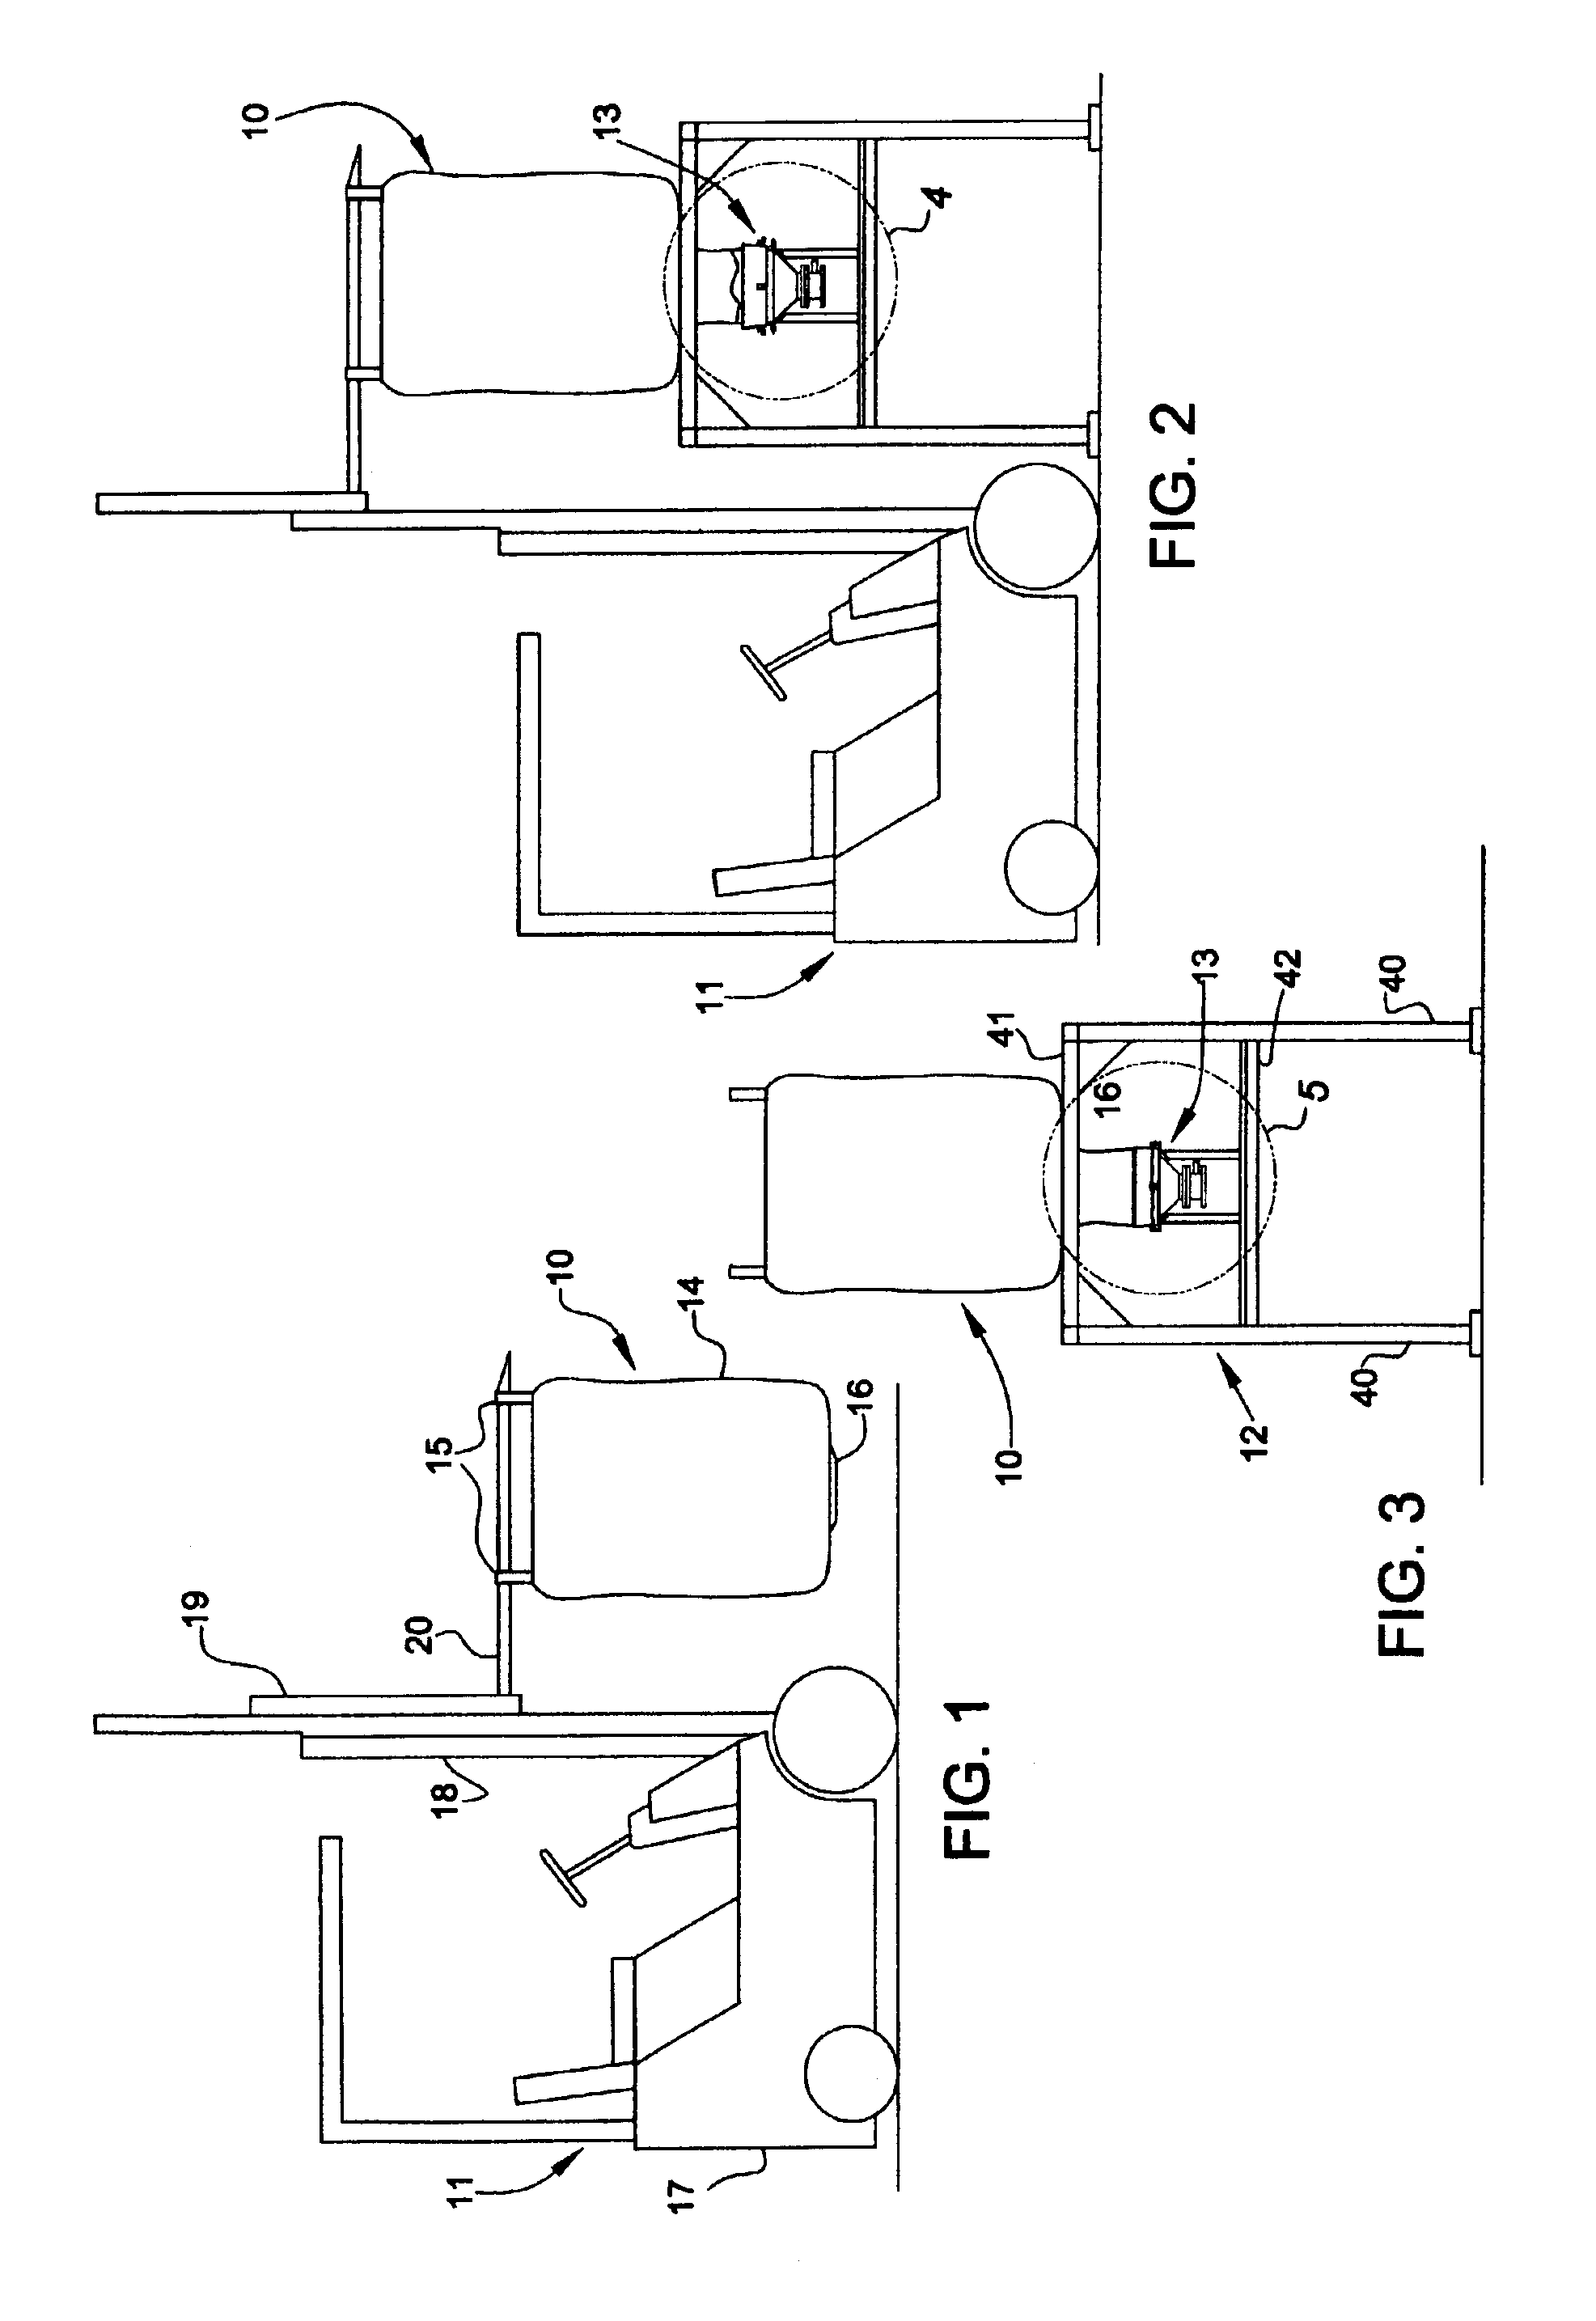 System and method for storing, transporting and dispensing bulk particulate materials and dispensing apparatus therefor